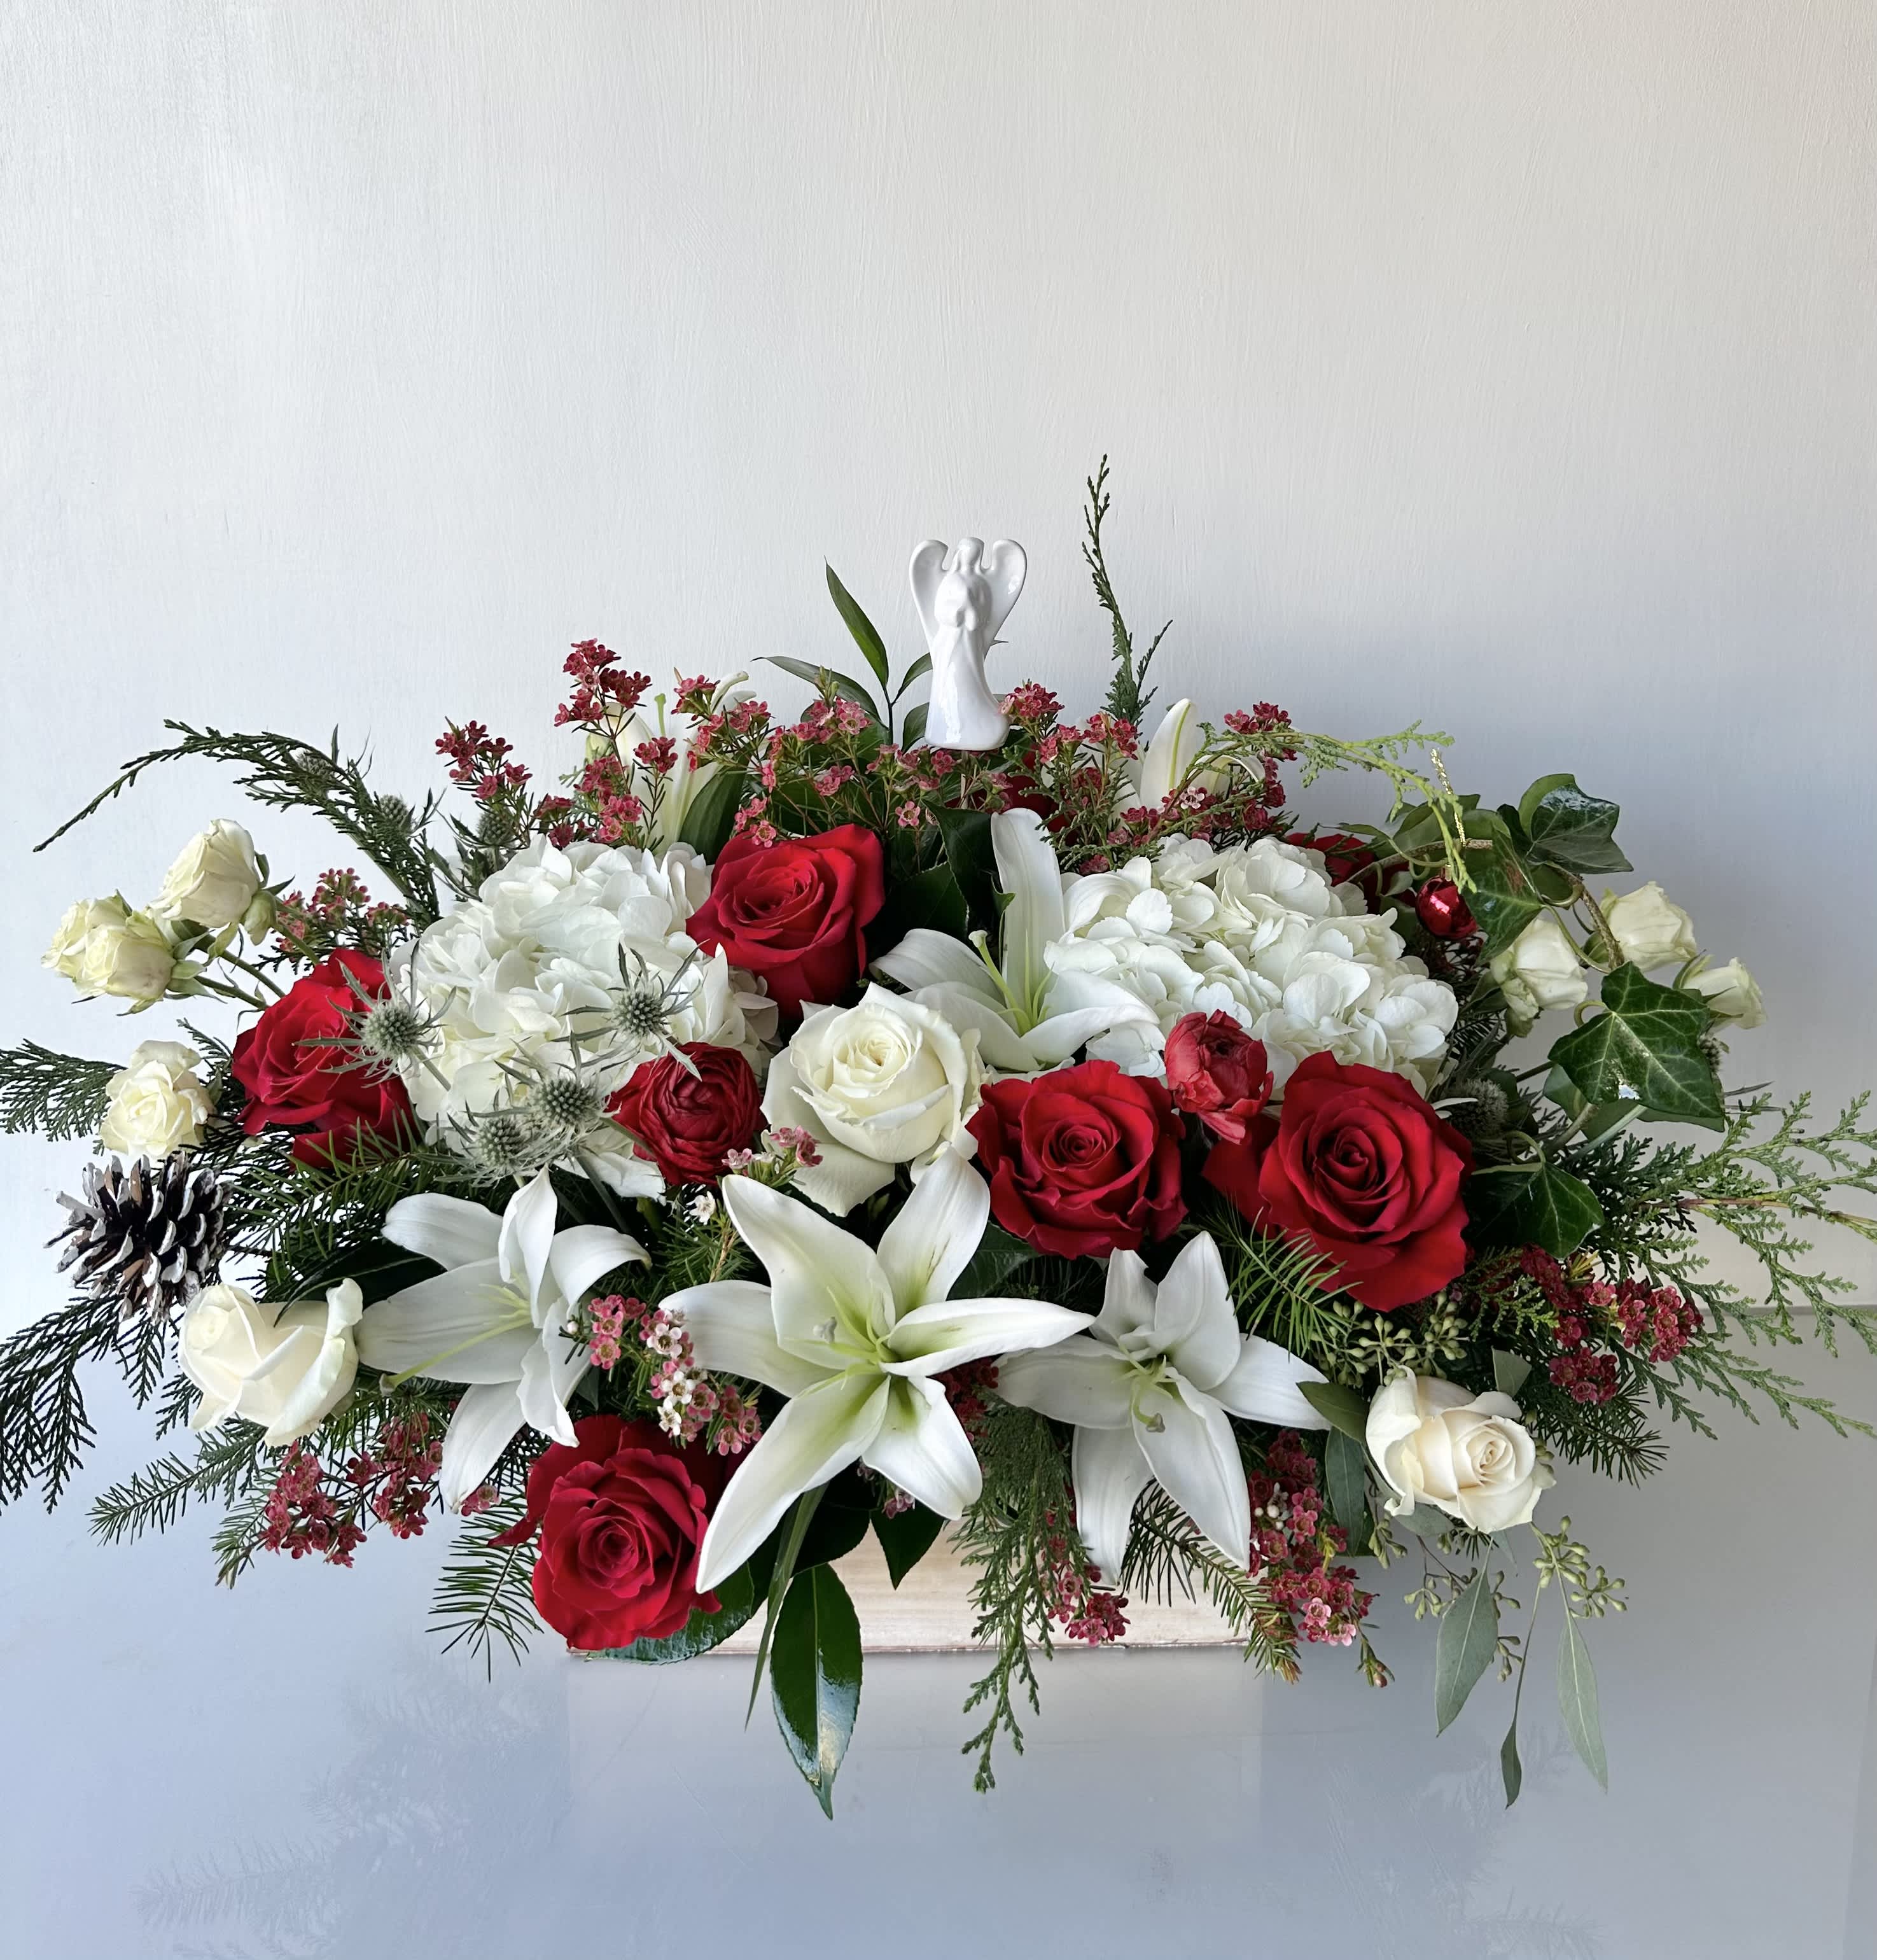 Christmas Love - A centerpiece of fresh-cut flowers in red, white, and greenery with an angel symbol.